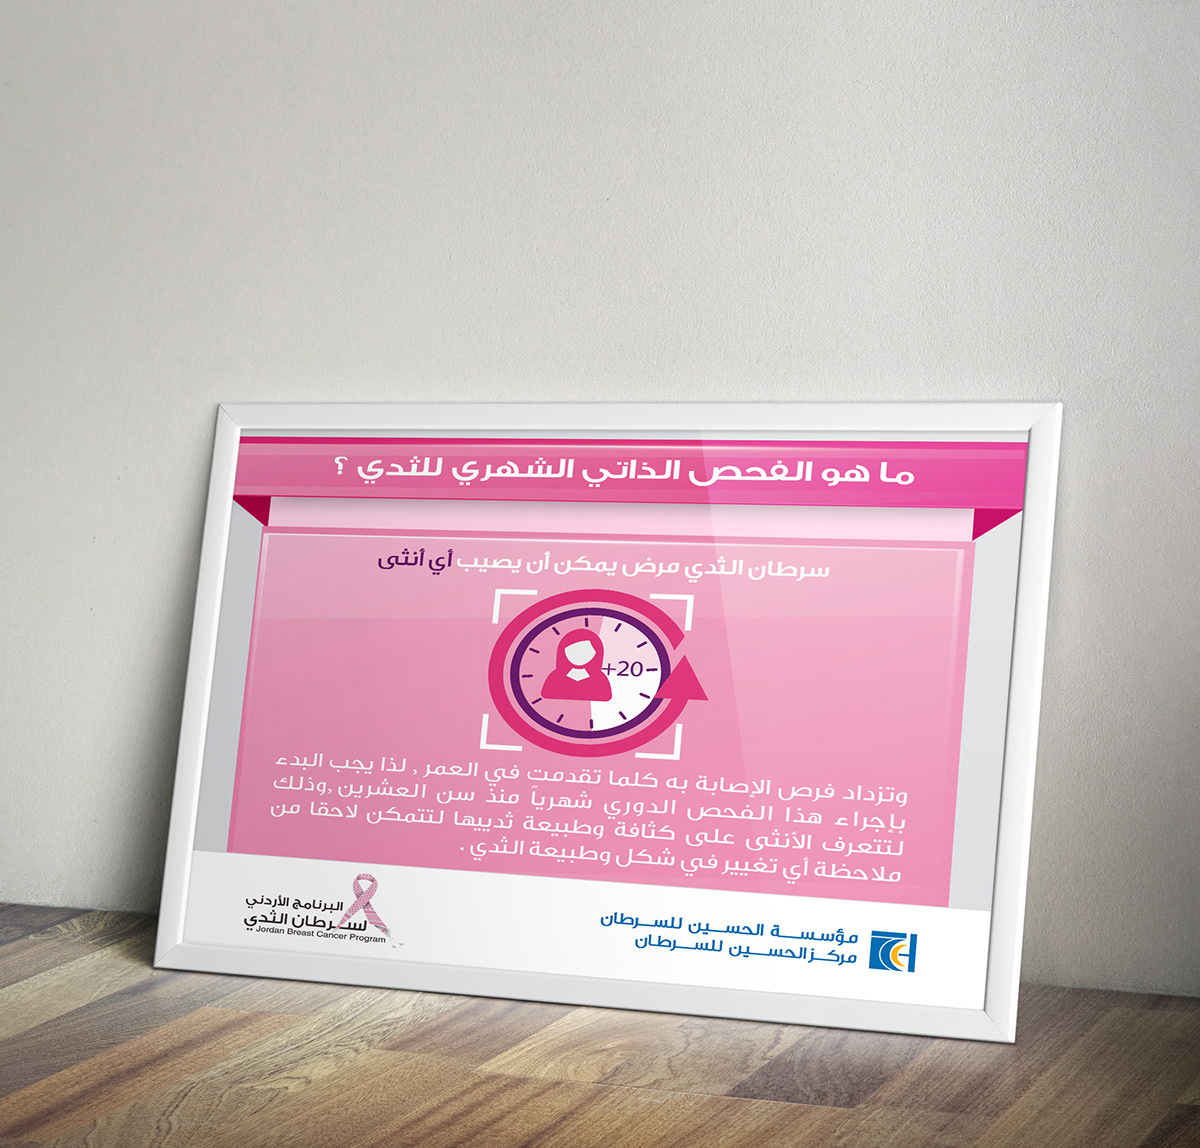 king hussein cancer center info graphics